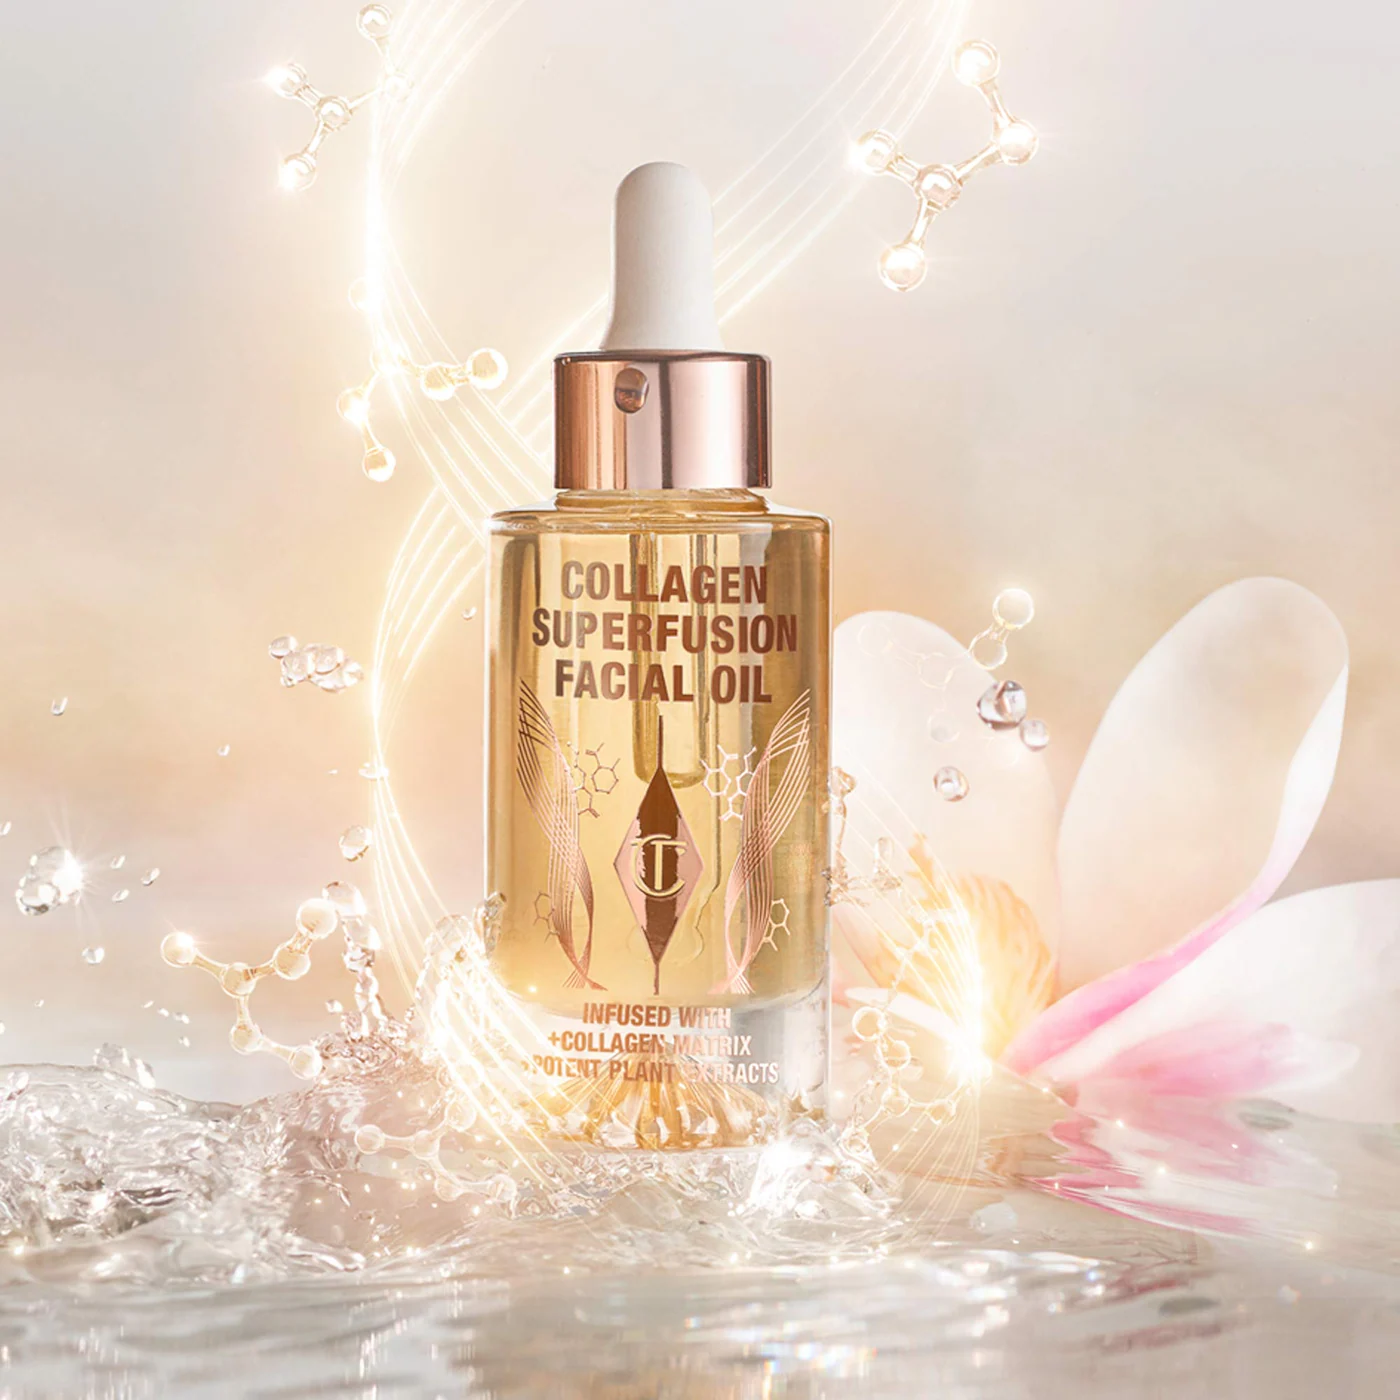 Charlotte Tilbury - Коллагеновое масло для лица Collagen Superfusion Firming &amp; Plumping Facial Oil - Фото 4